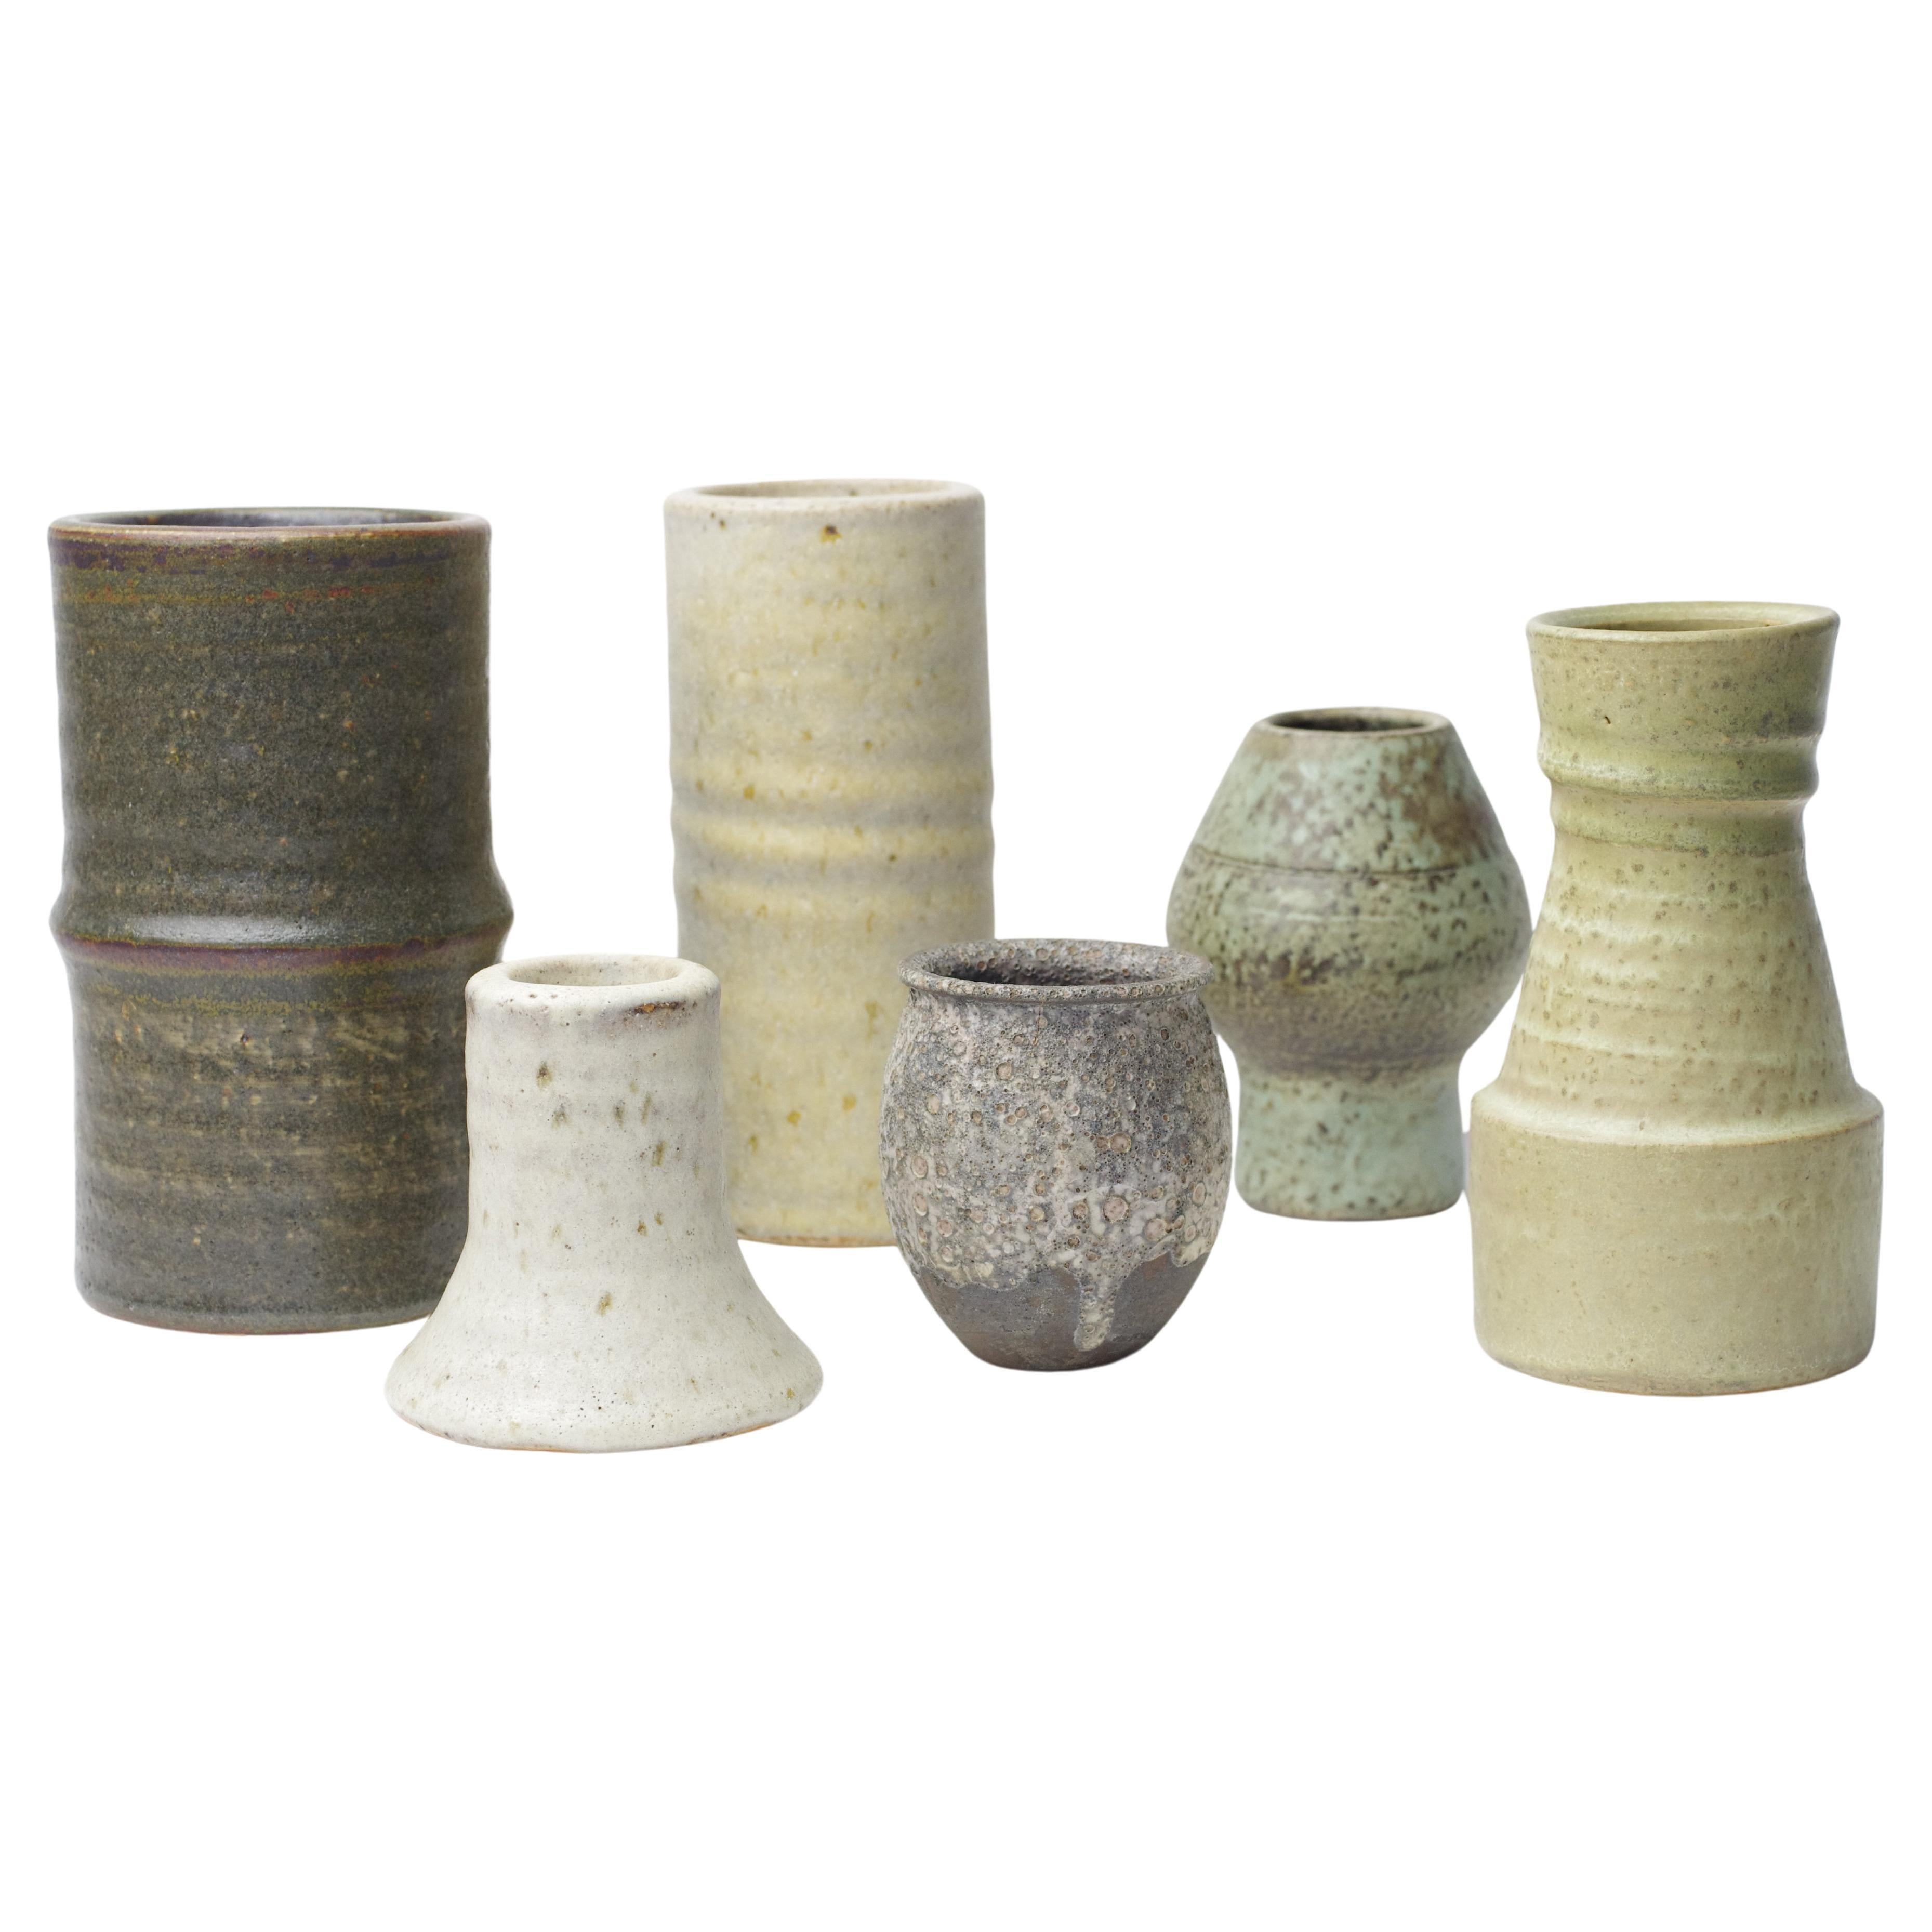 Mobach vases (6x)